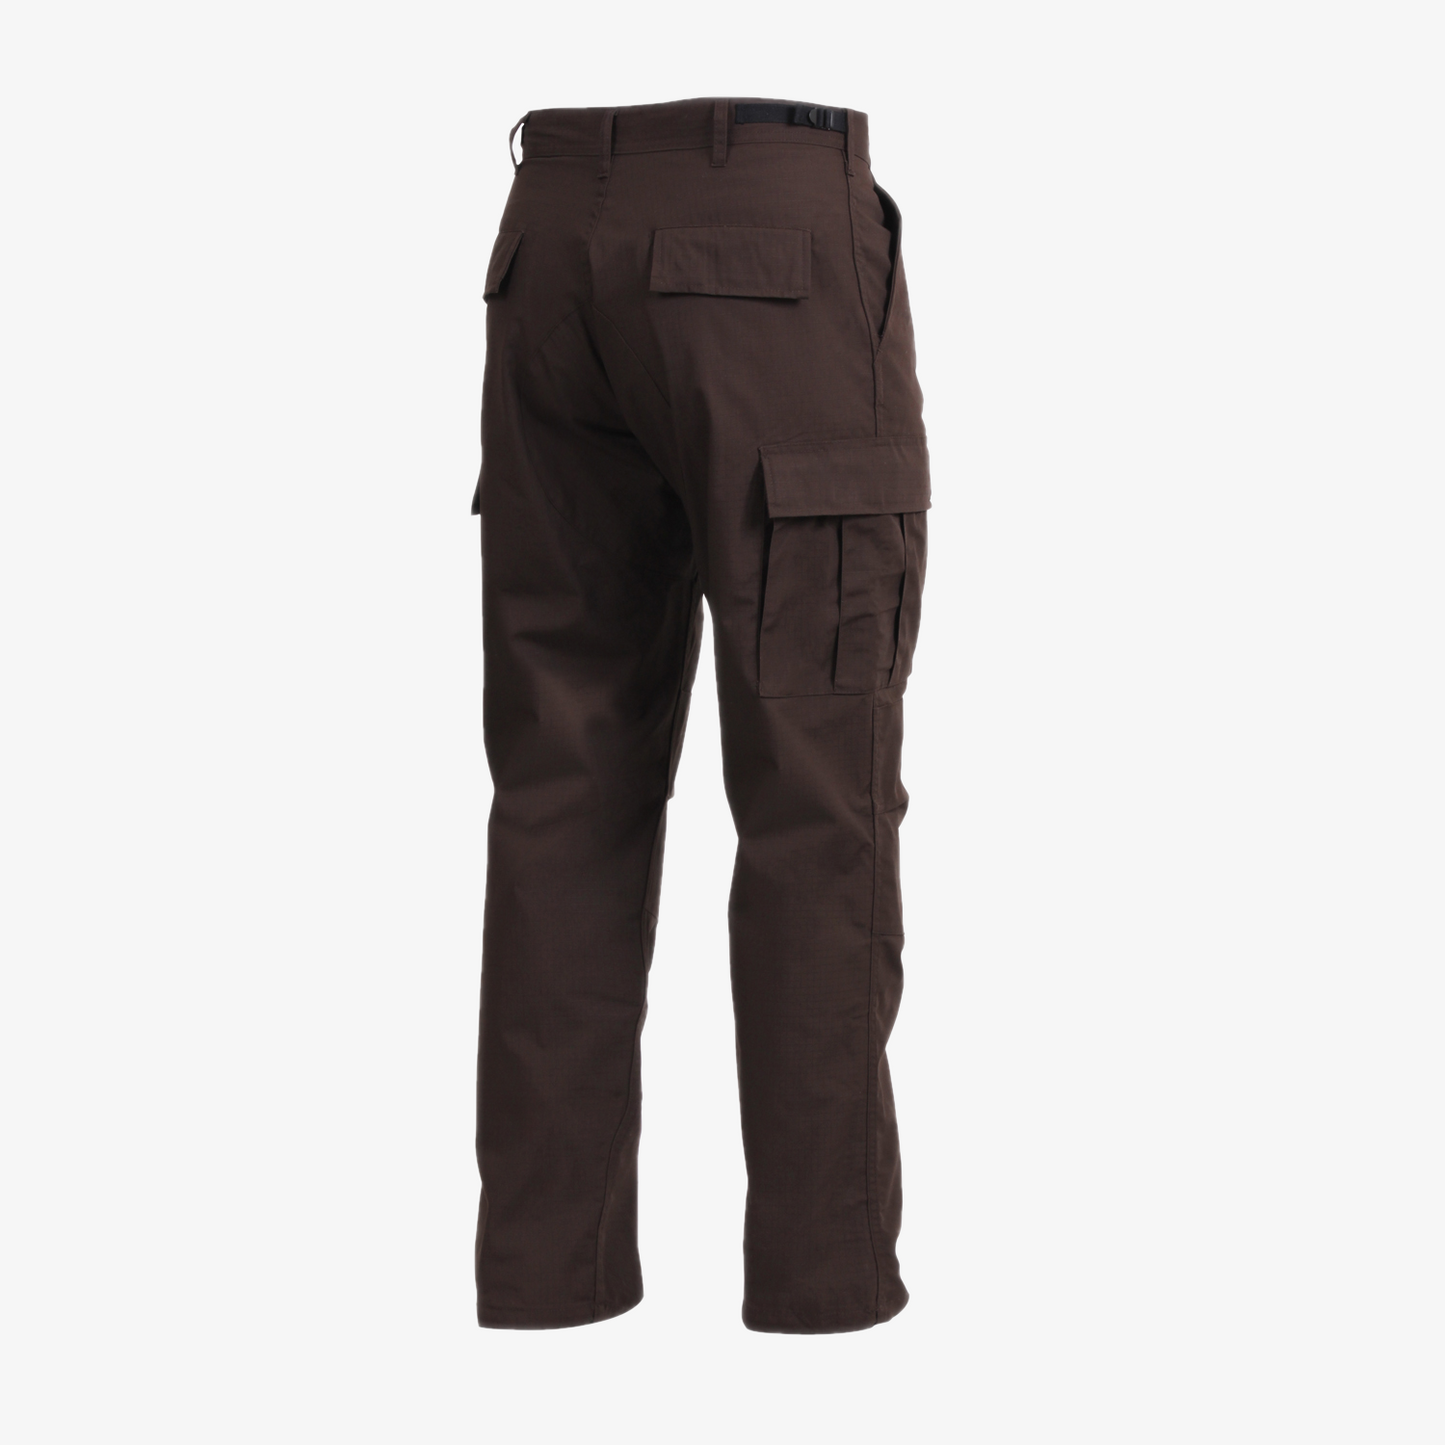 Rothco - SWAT Cloth BDU Pants, Color: Brown, Size: L ( 35'-39')